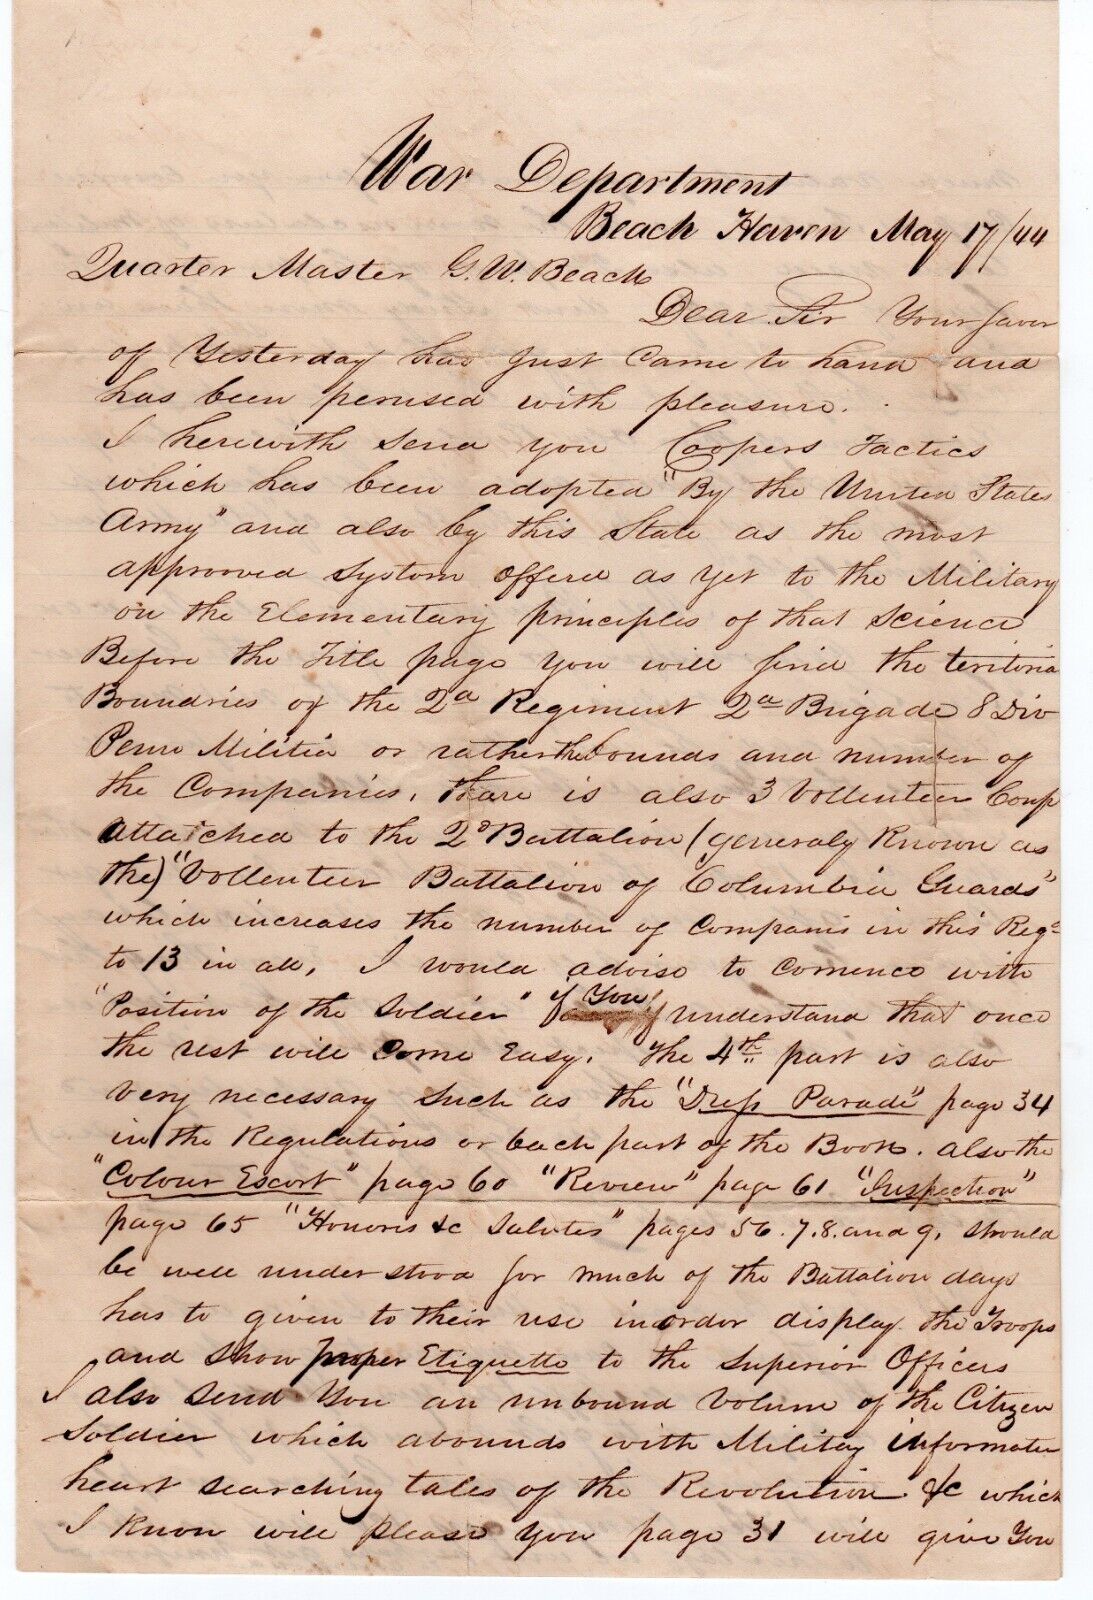 1844 War Department Letter to Quartermaster G. W. Beach Concerning Commission